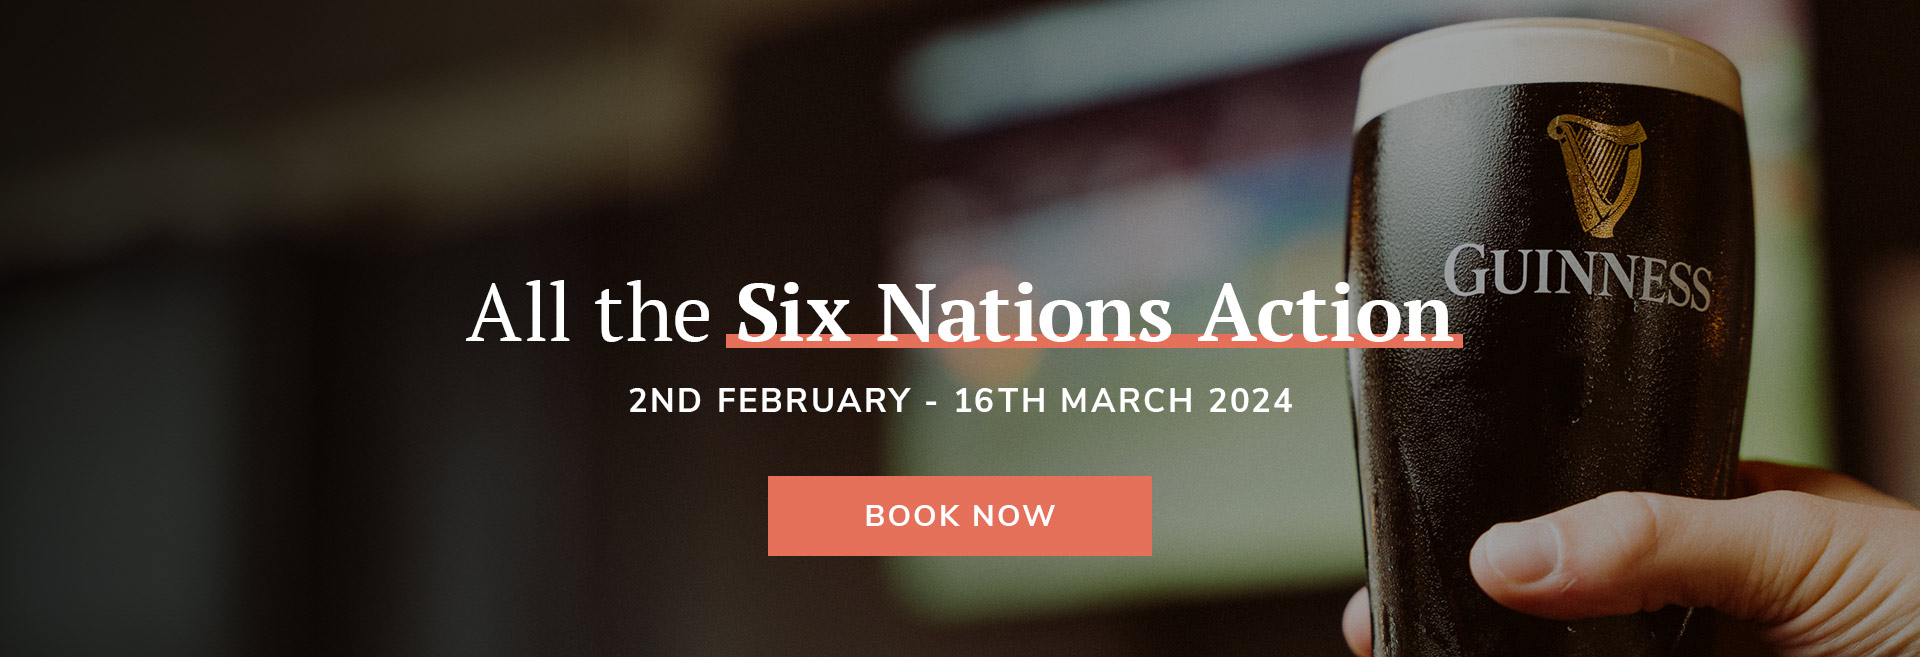 Rugby Six Nations 2024 at The Gipsy Moth